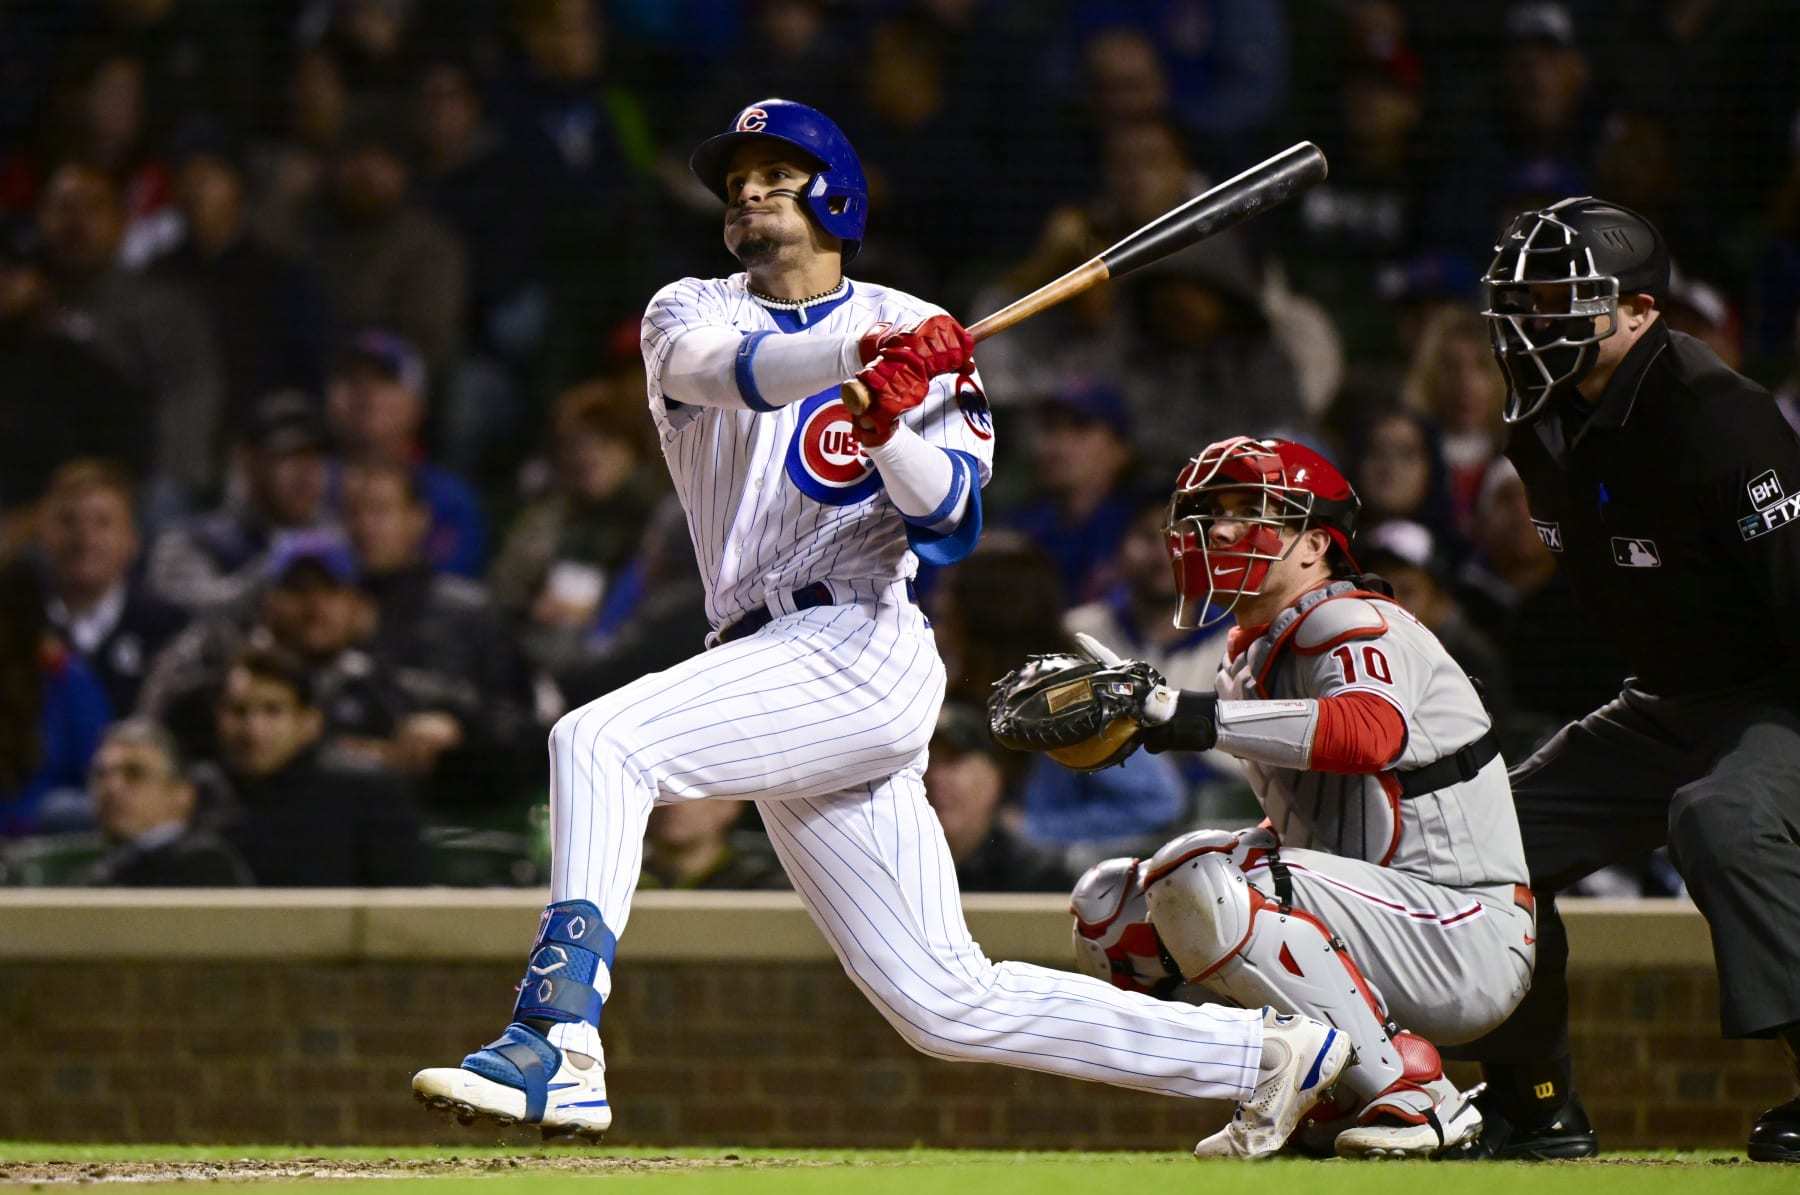 Cubs bring in Hosmer, Mancini to fill glaring hole at first base